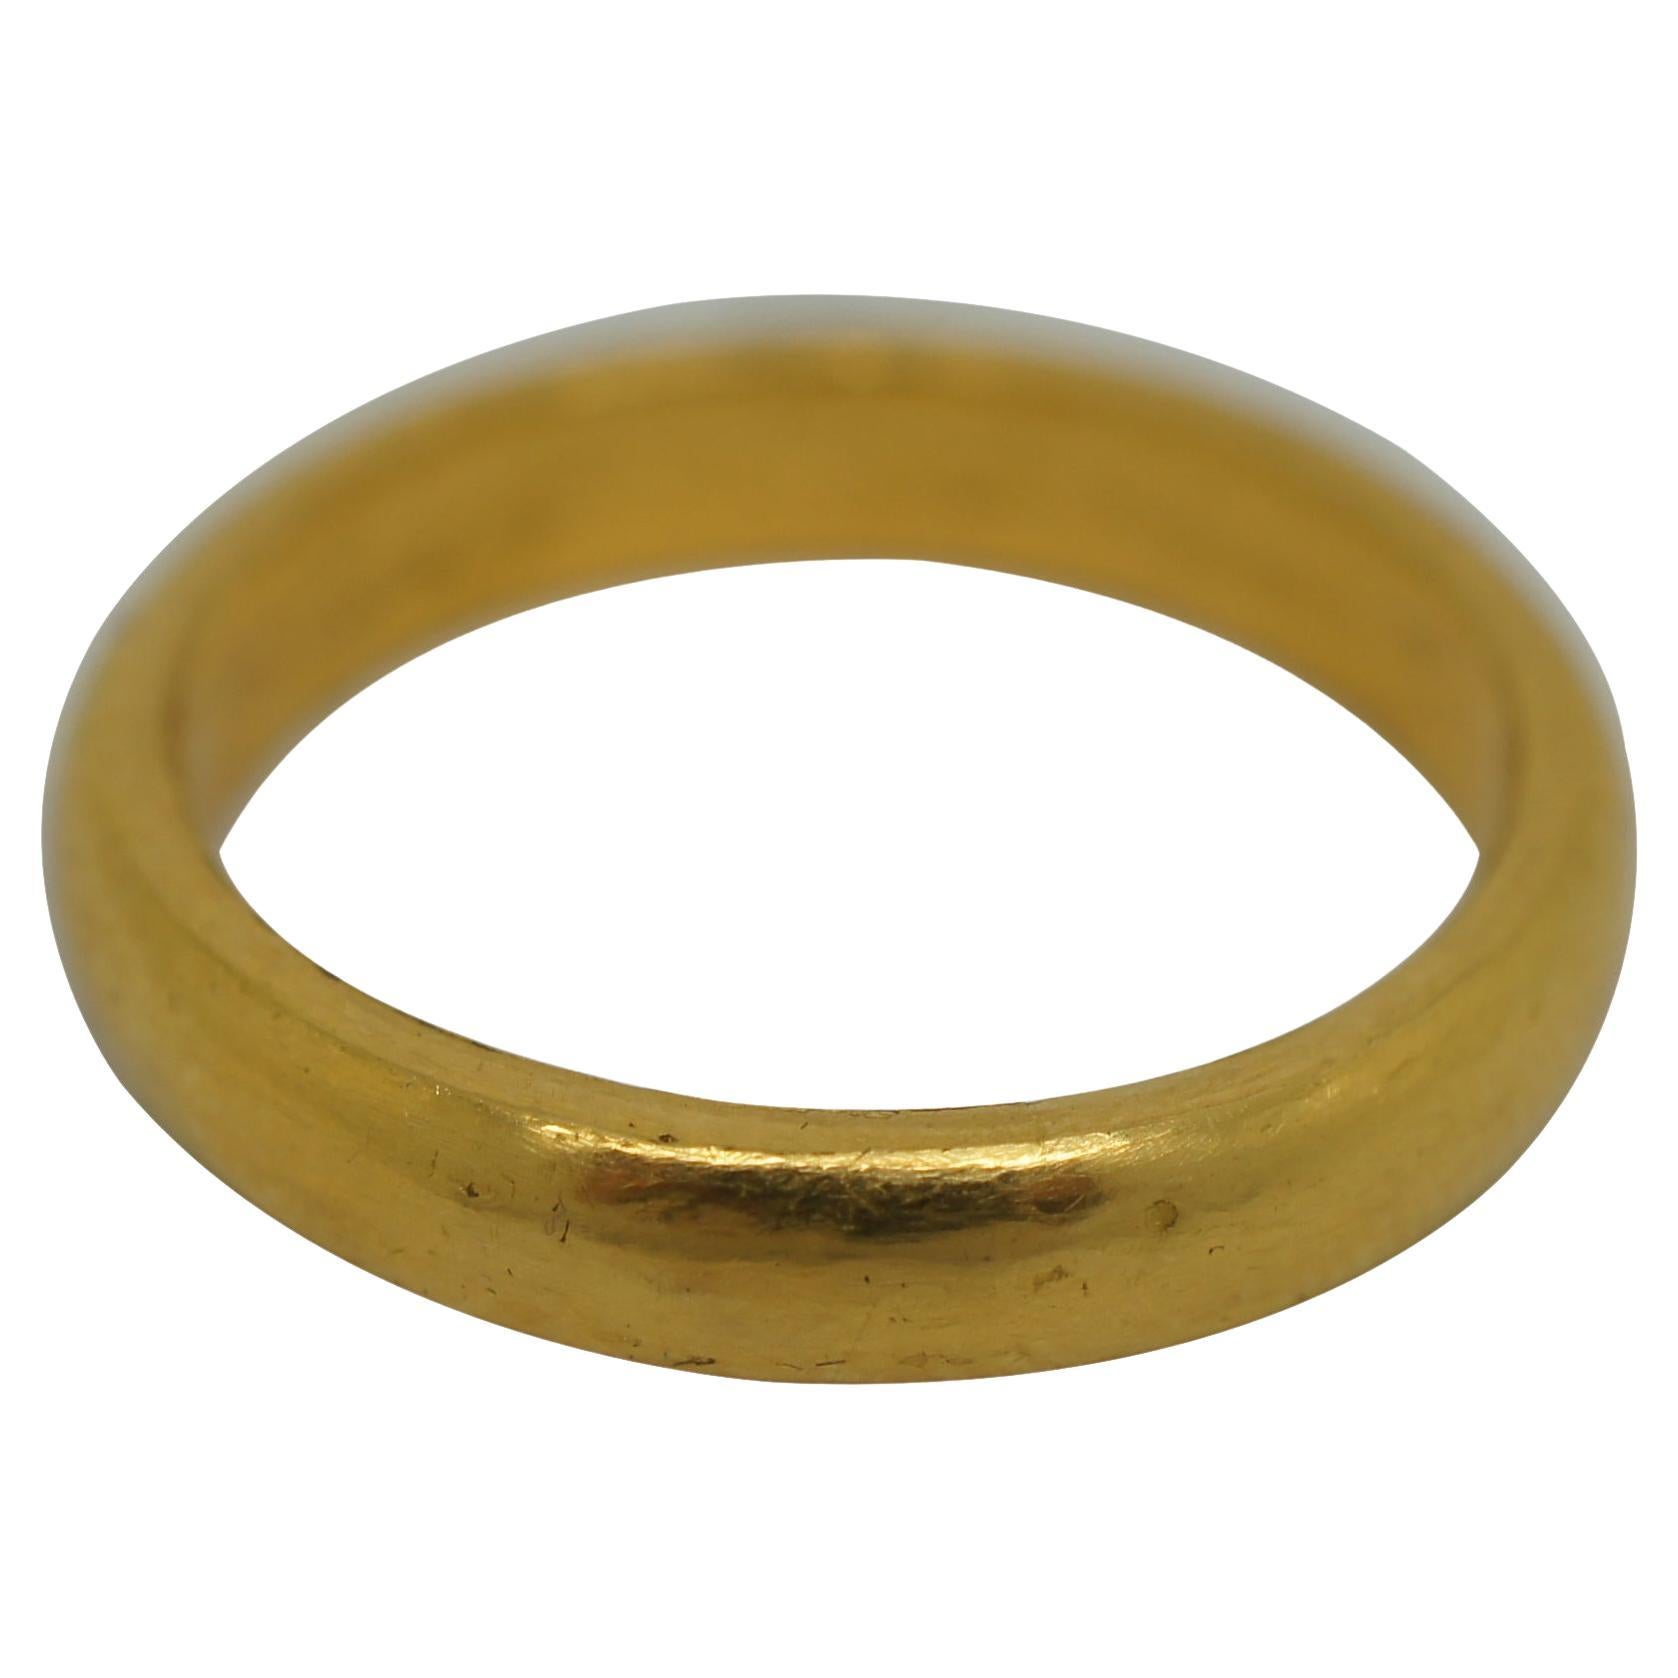 Vintage 24k Solid Yellow Gold Wedding Band Engagement Ring 10.5g For Sale